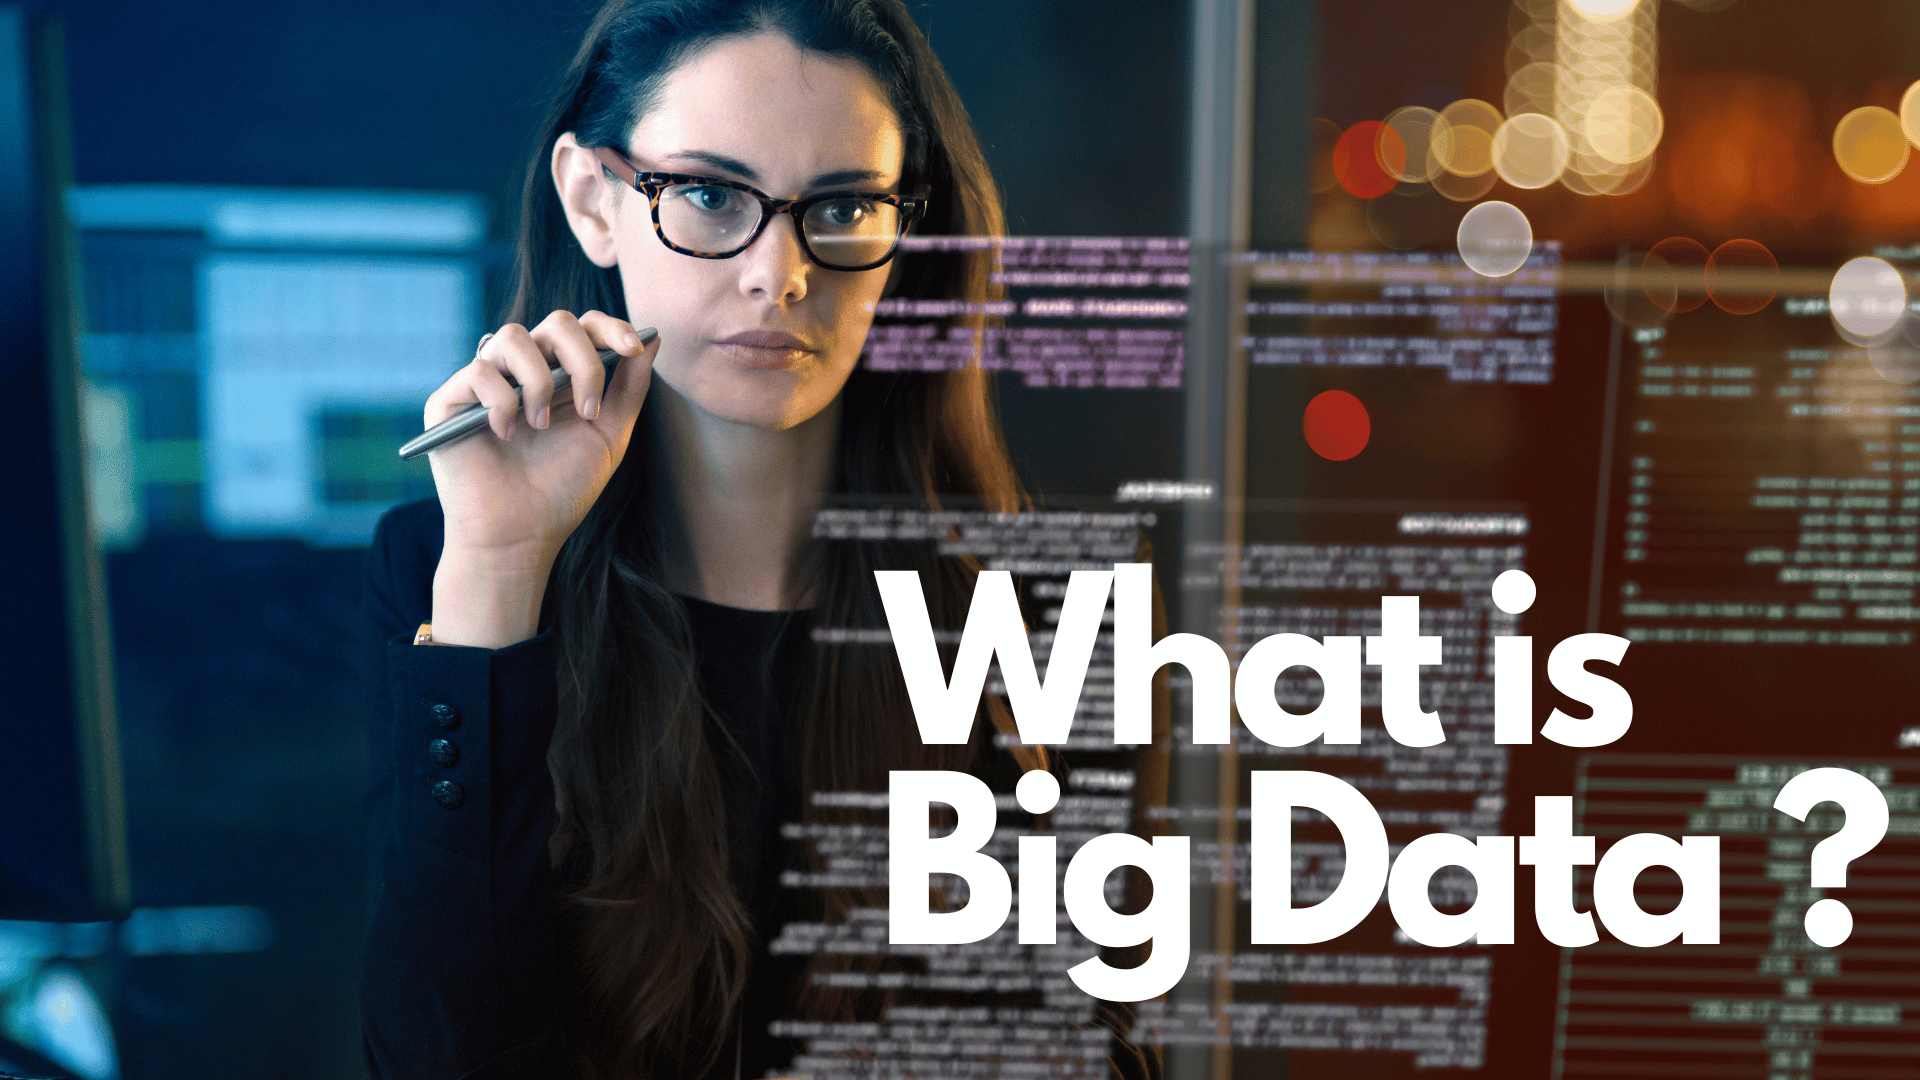 What’s the fuss about big data?